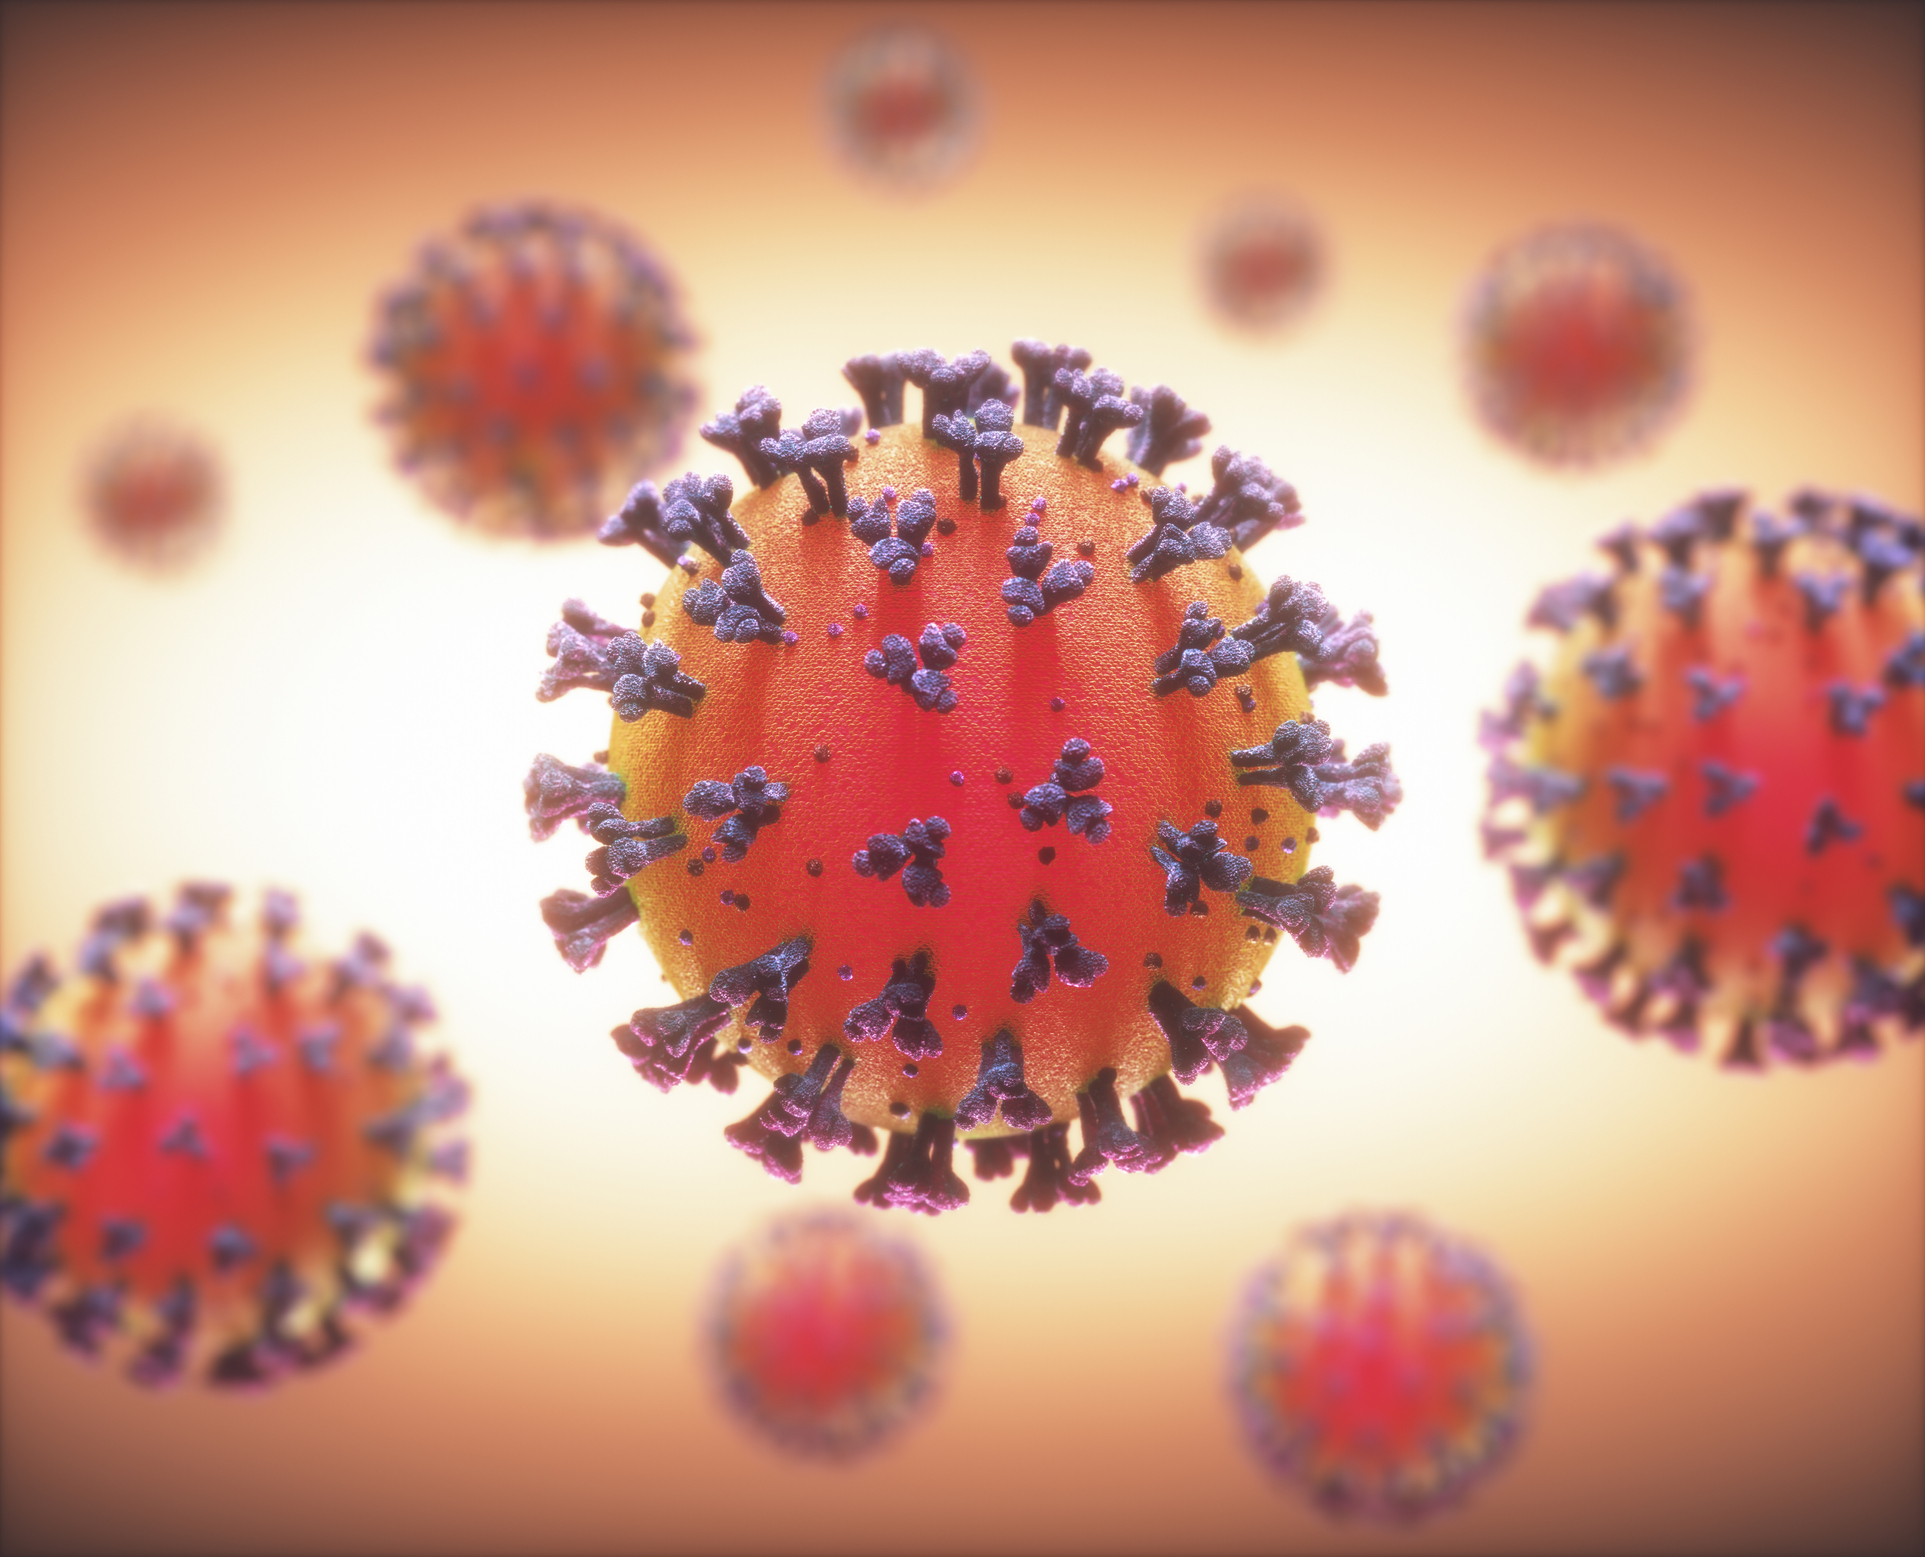 Why is this coronavirus such a threat?